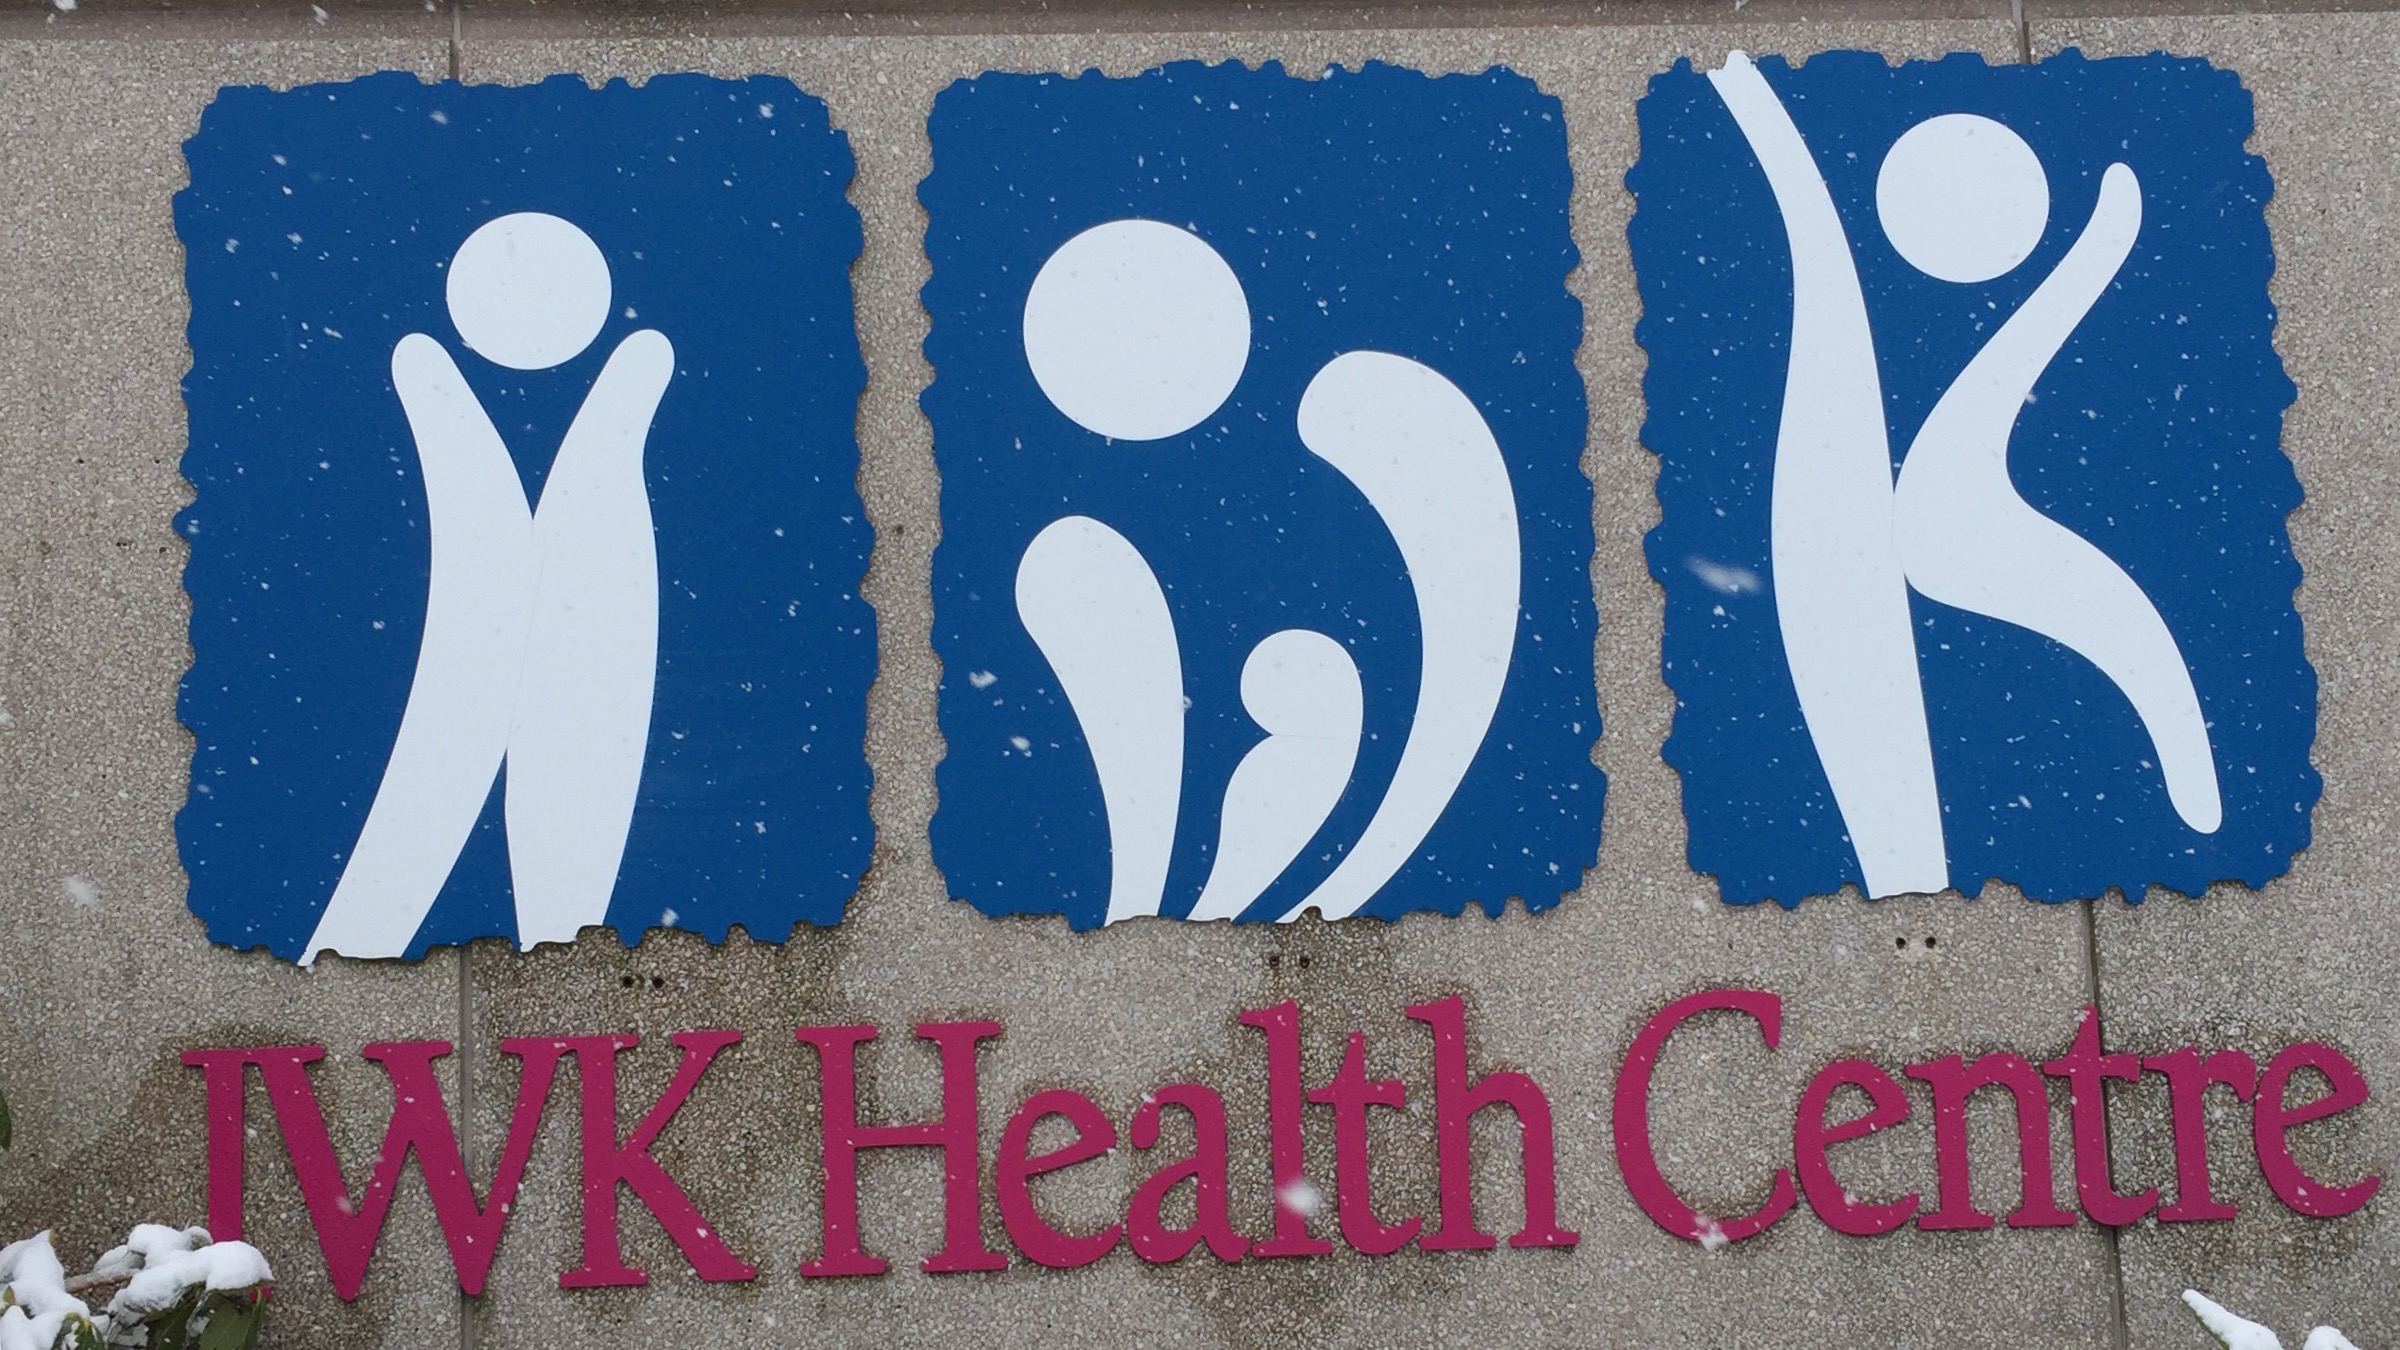 IWK Health Centre was the only hospital in Atlantic Canada to participate in the study.